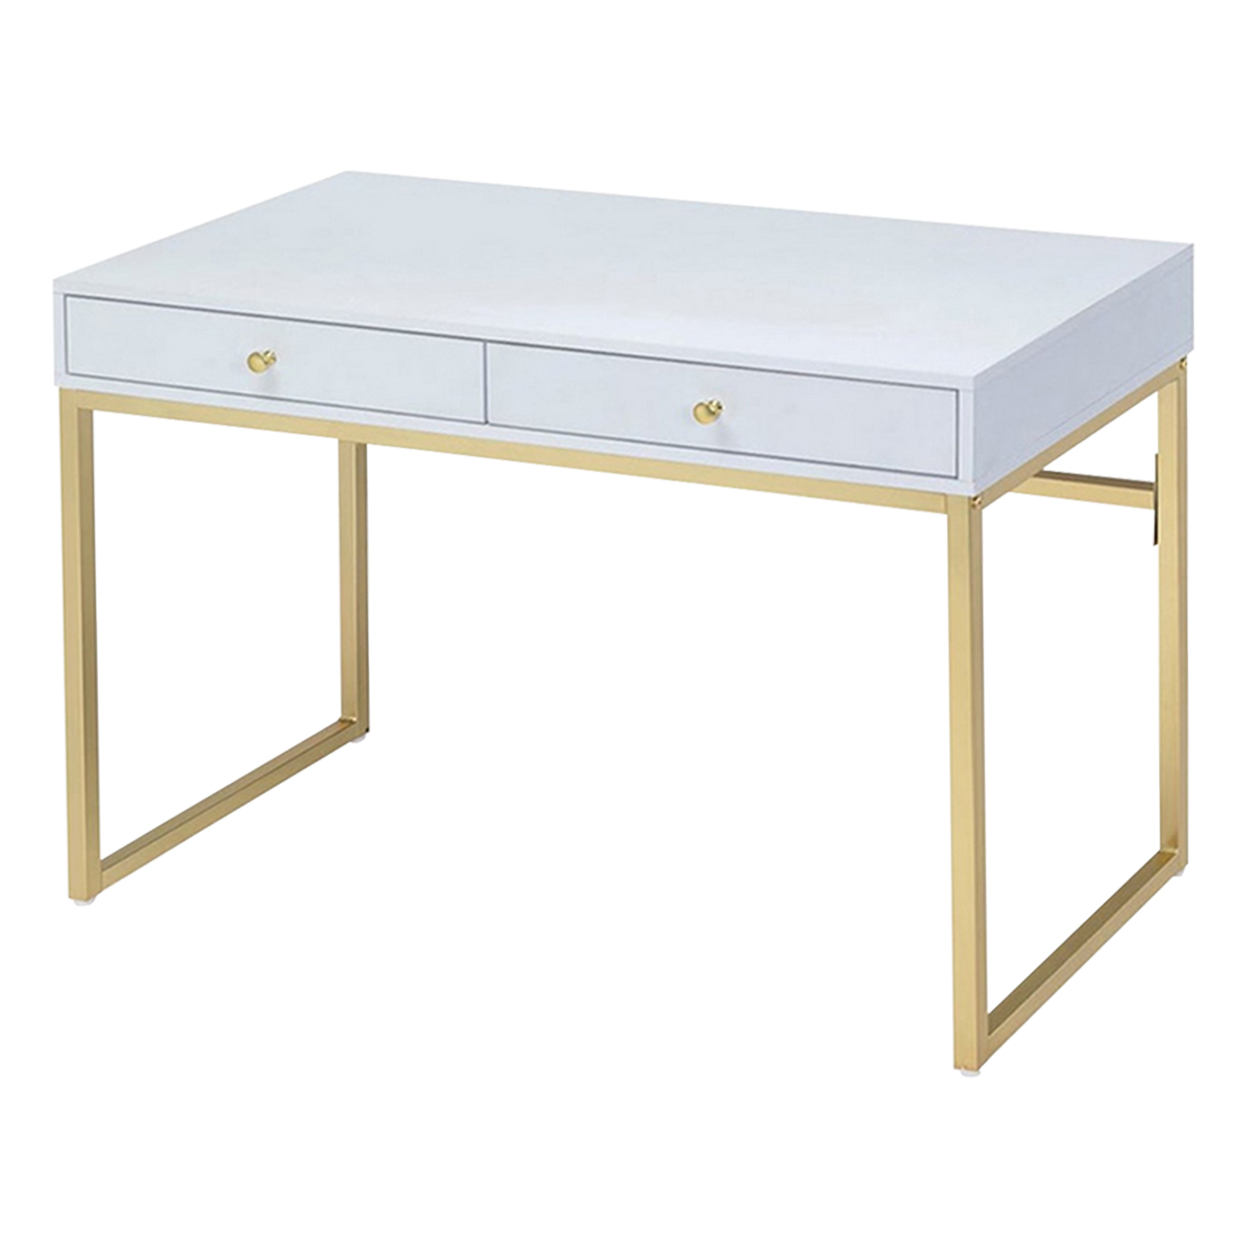 Rectangular Two Drawer Wooden Desk With Metal Sled Legs, White And Gold- Saltoro Sherpi - image 1 of 6